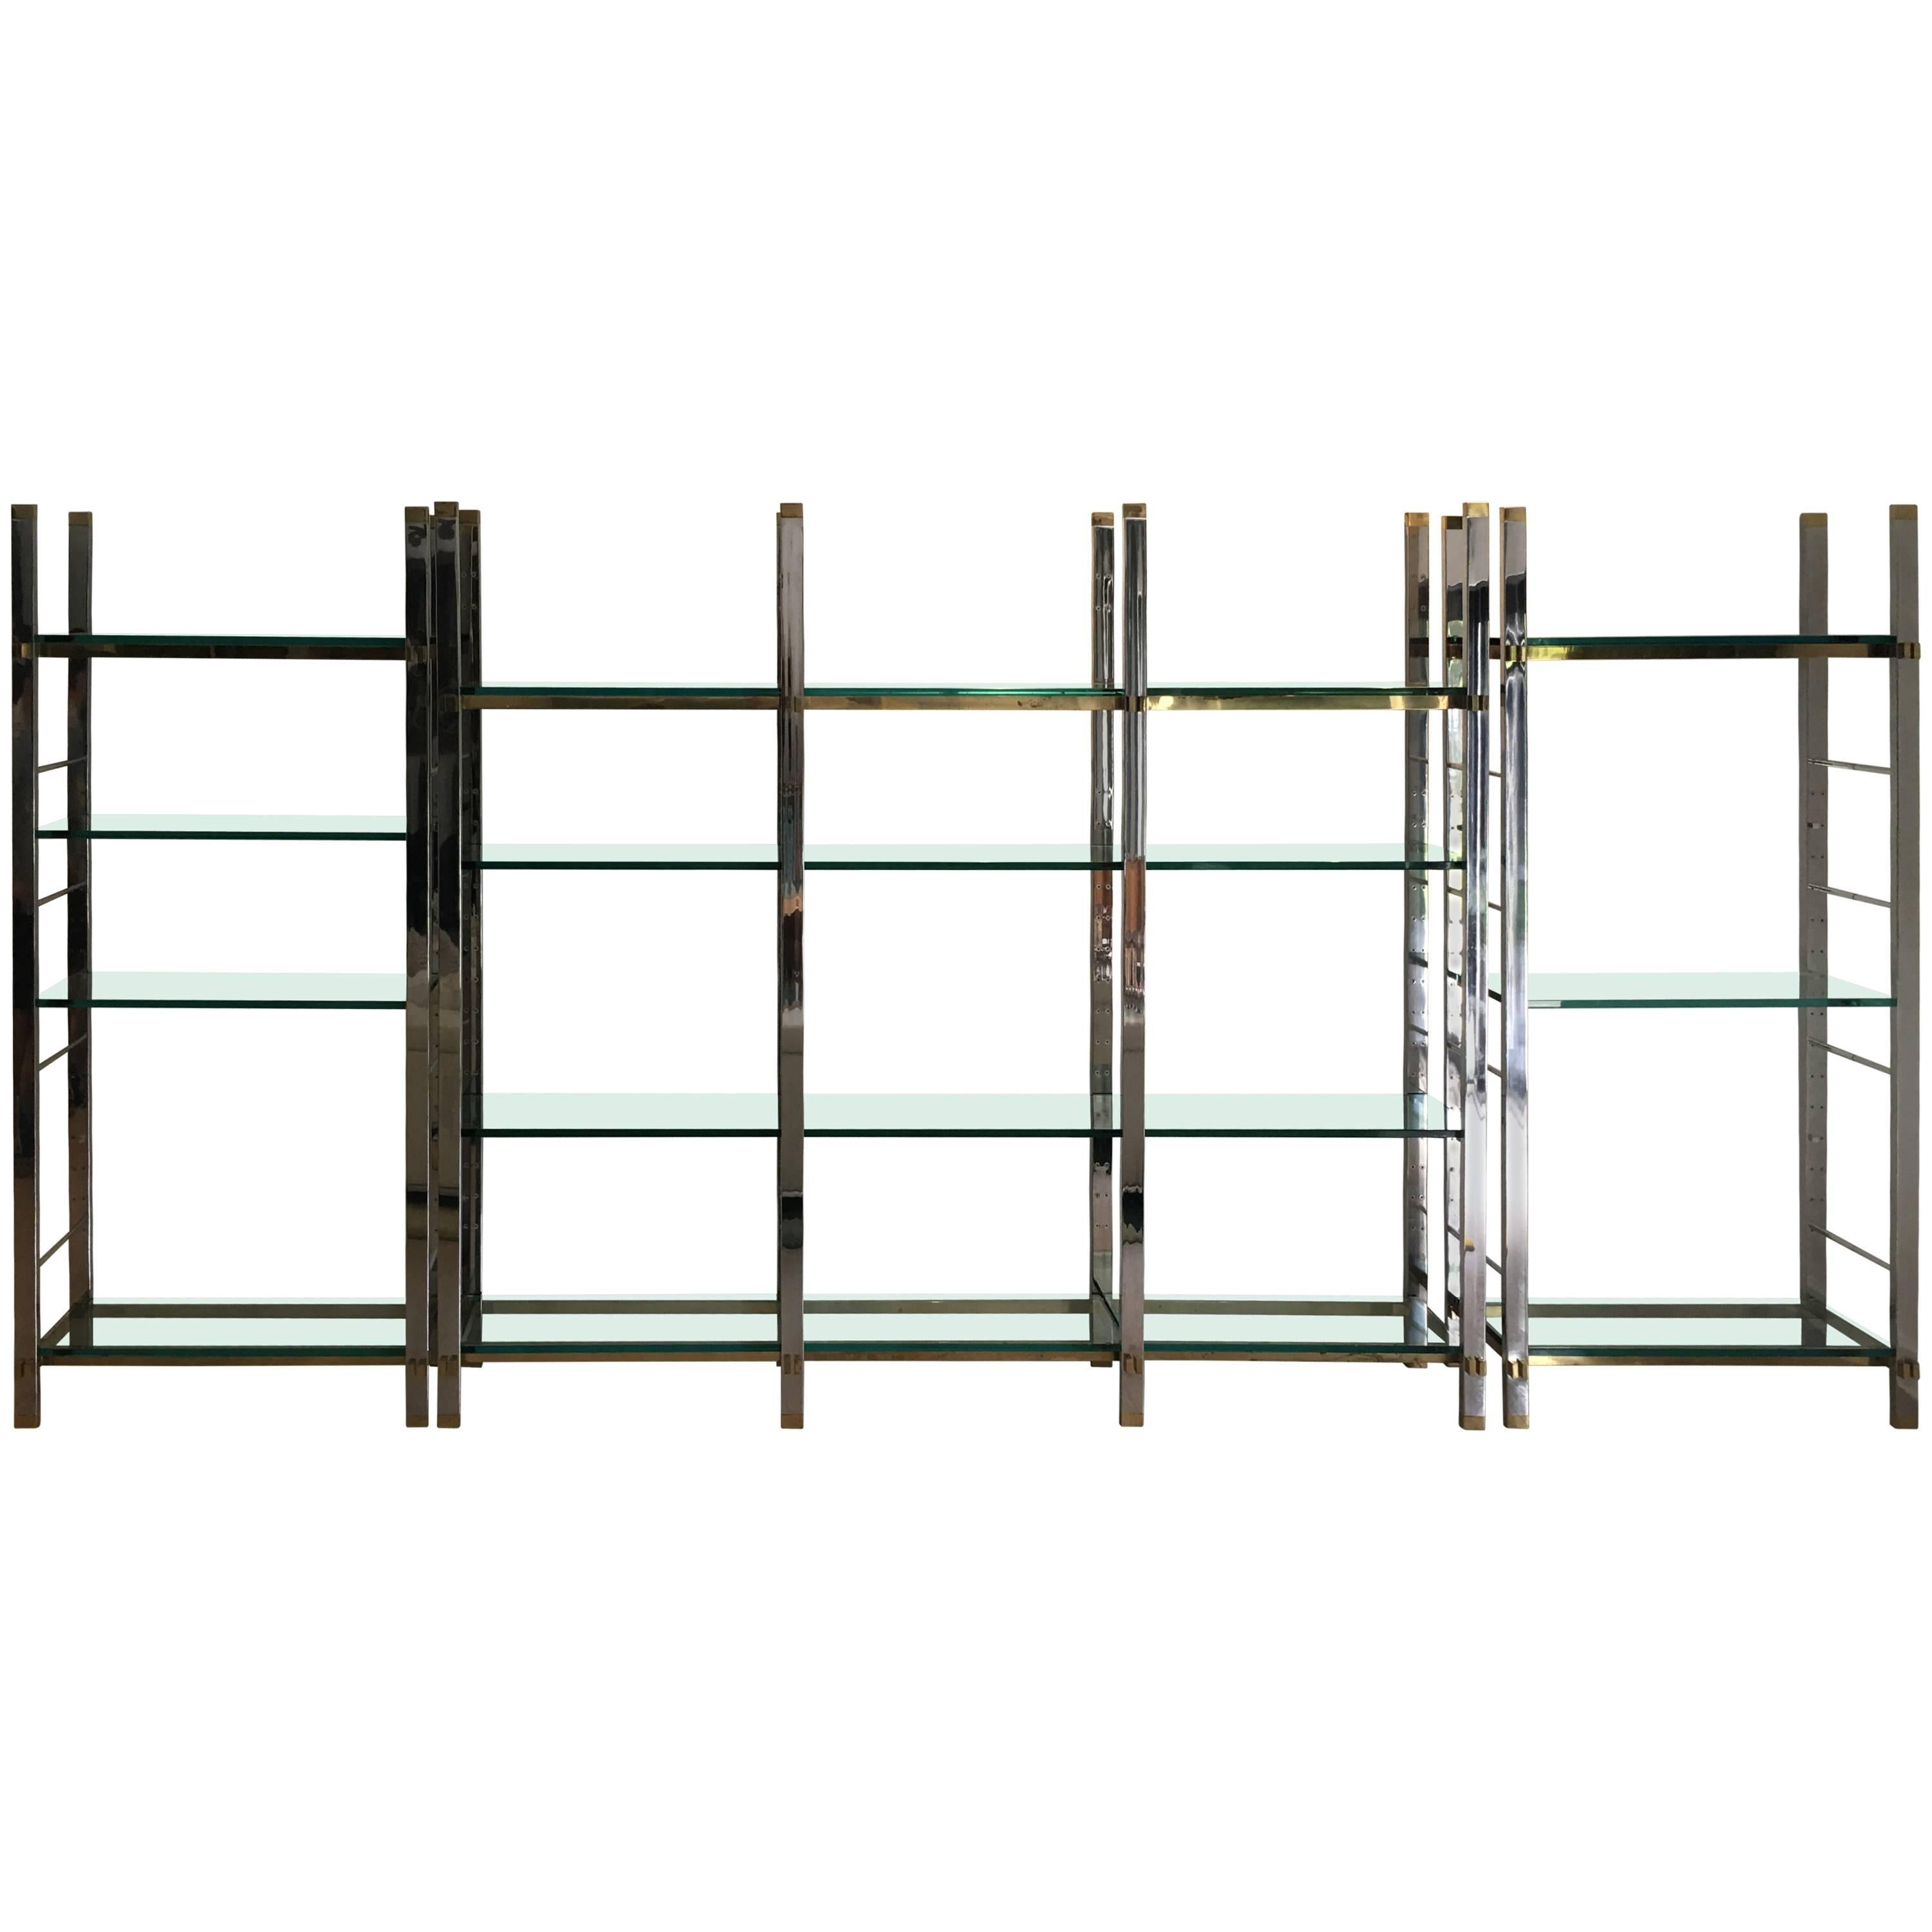 Very Sharp Looking High Quality Mixed-Metal Etageres or Wall Unit